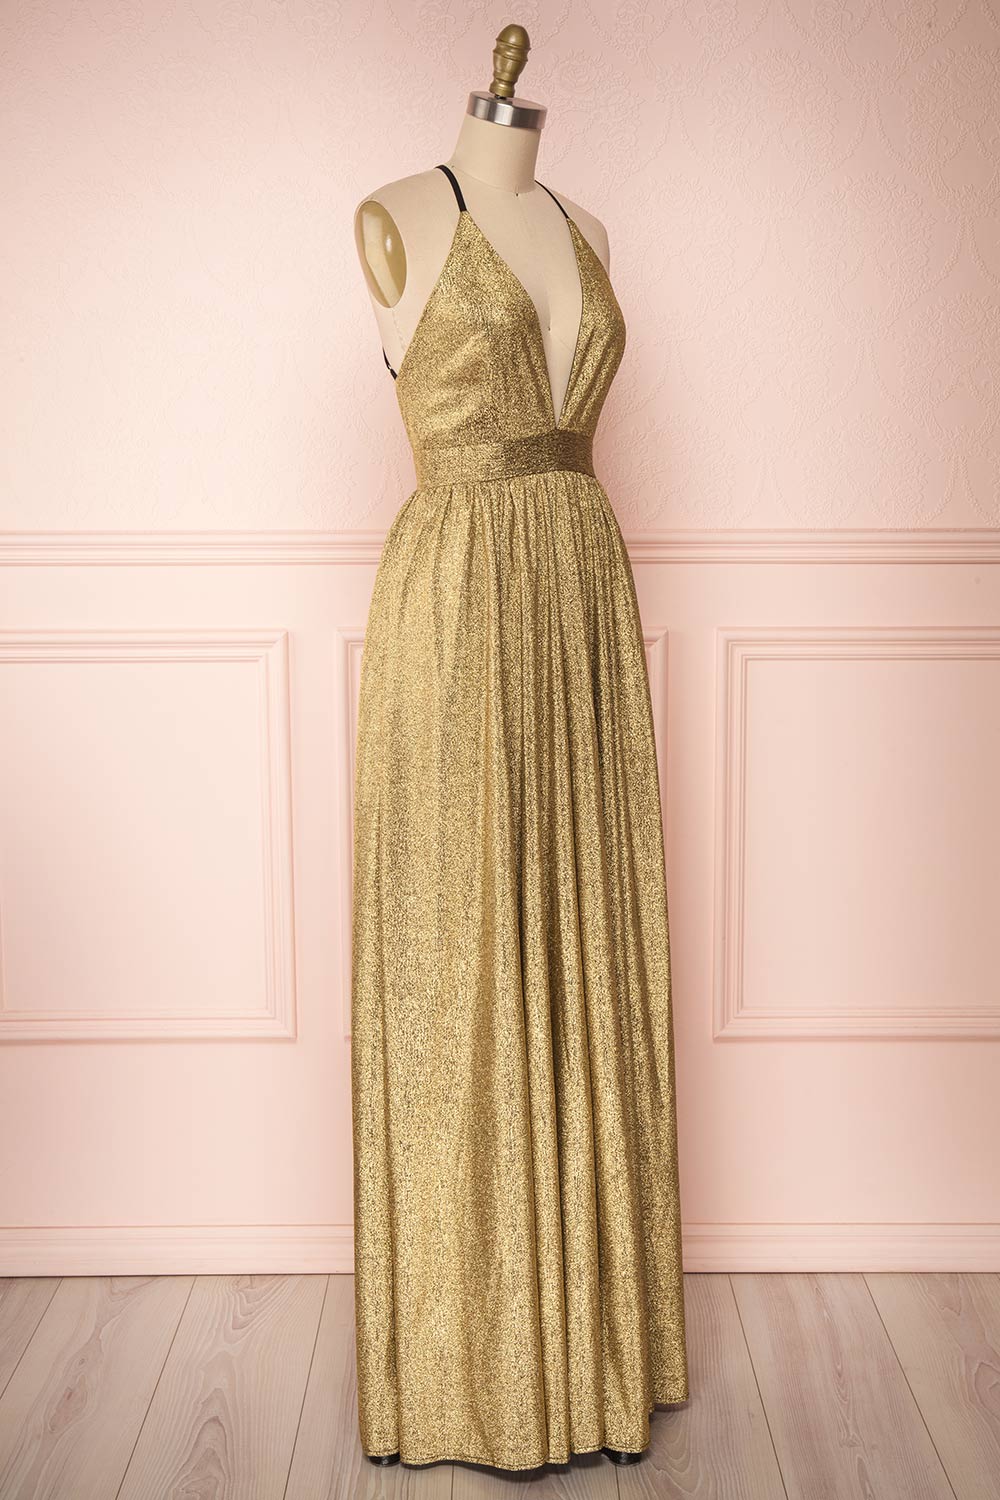 Anywa Or Gold Glitter Dress | Robe Longue side view | Boutique 1861